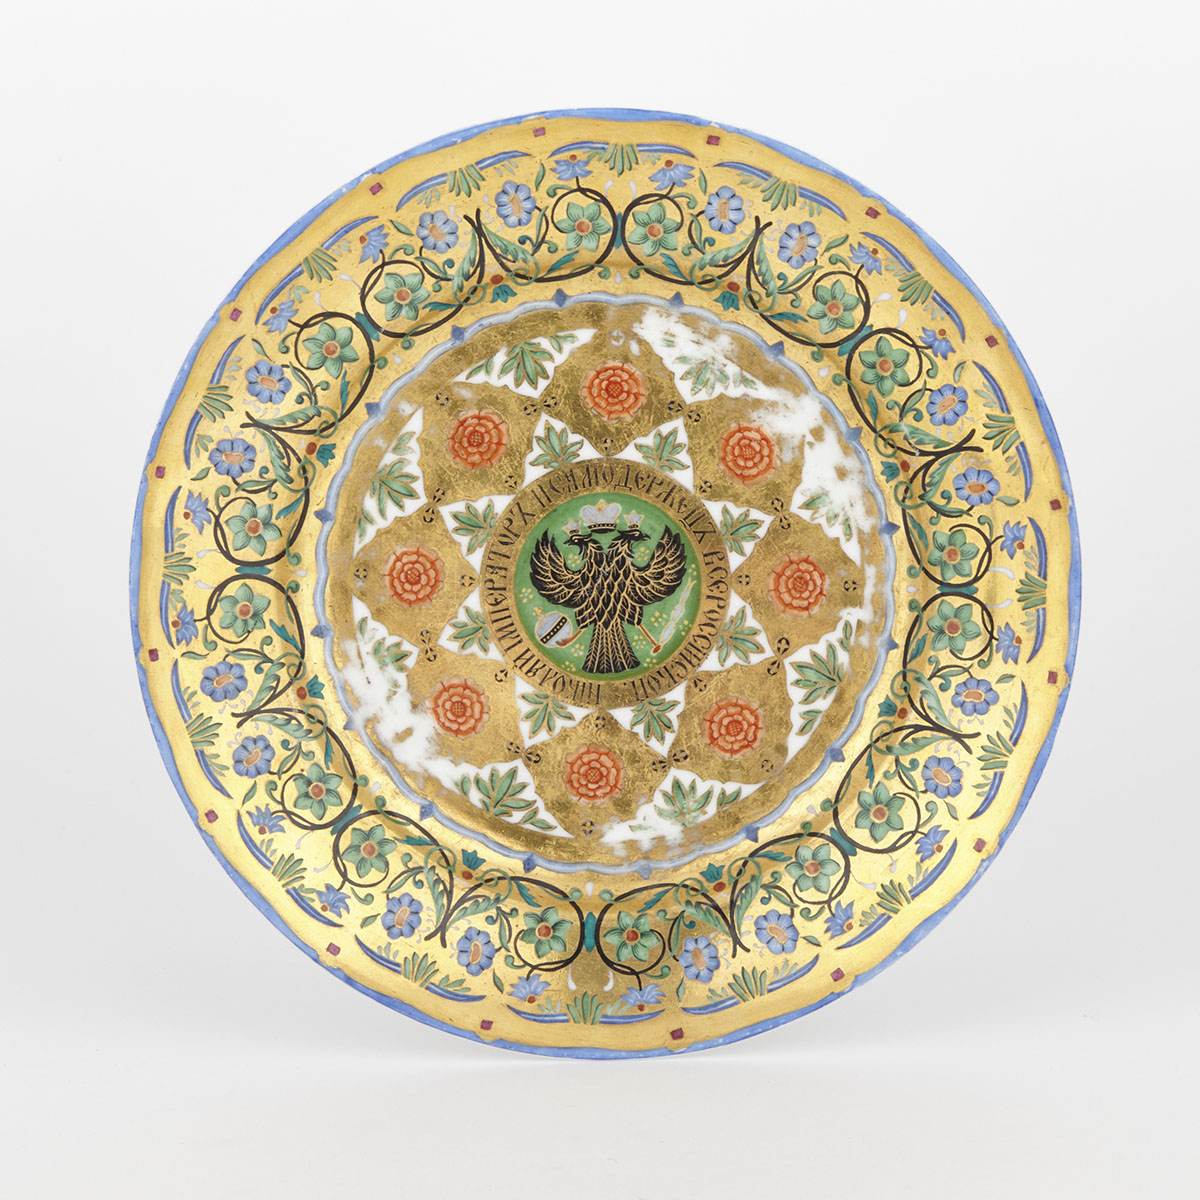 Russian Imperial Porcelain Plate, from the Kremlin Service, period of Nicholas I (1825-55)